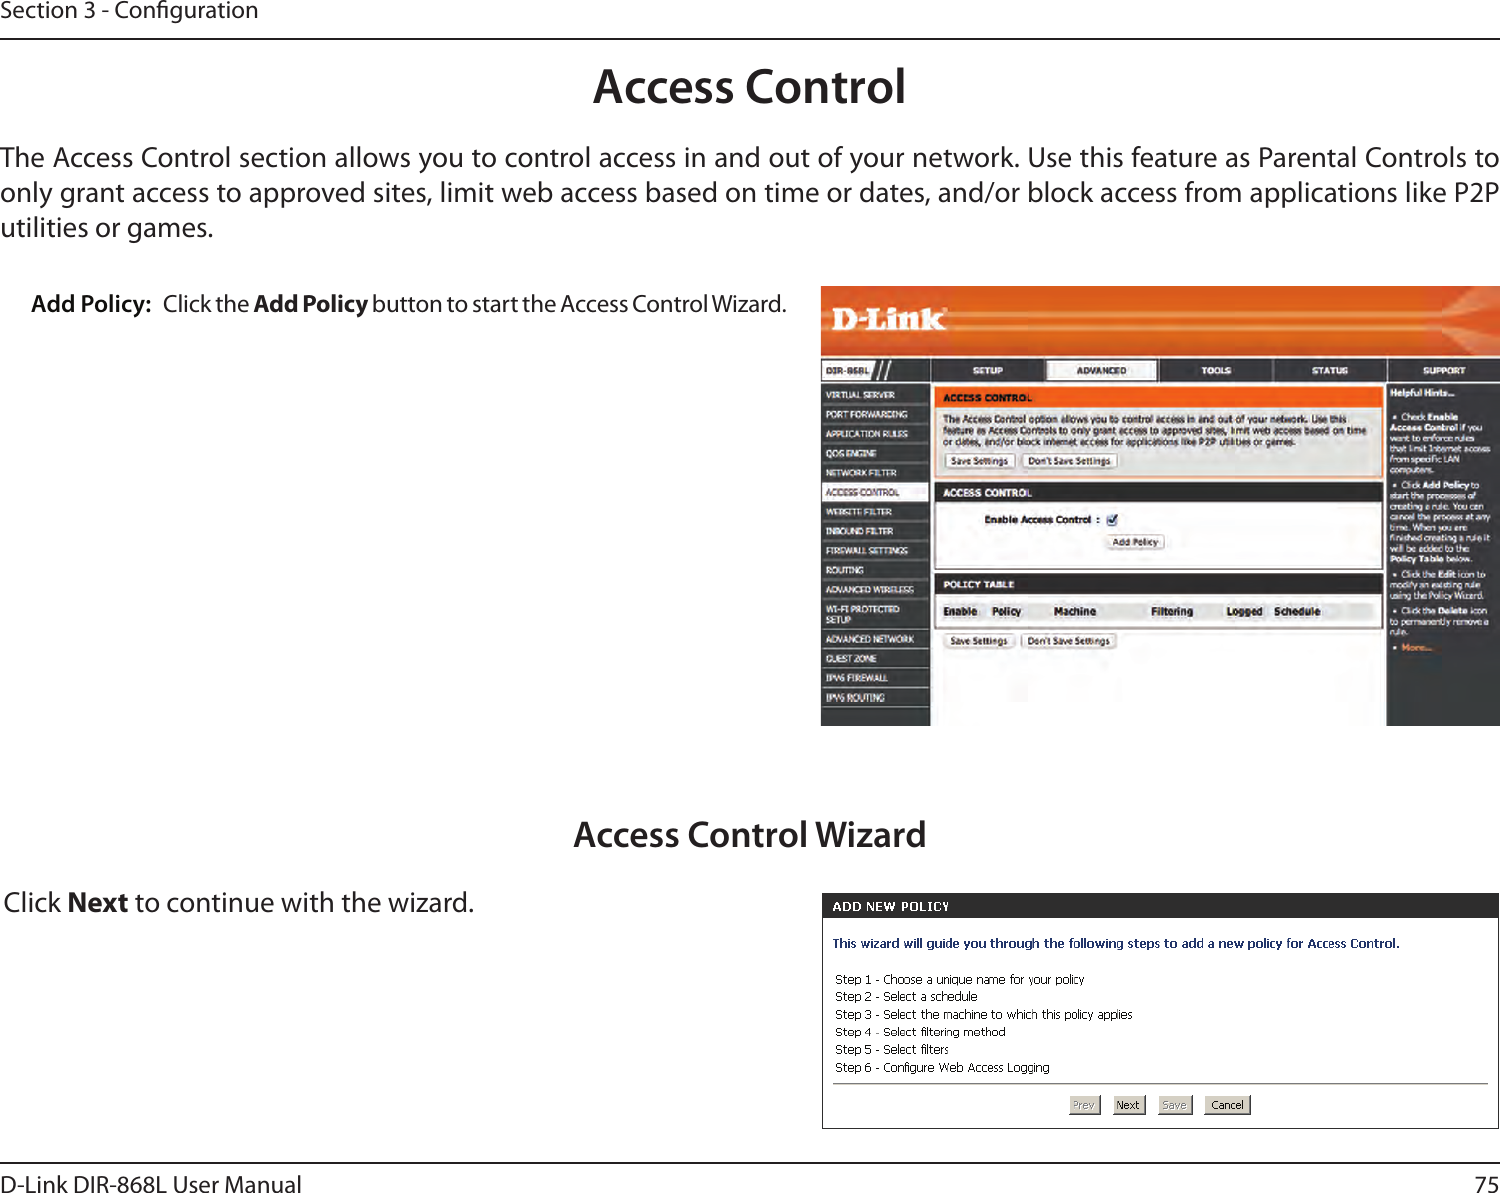 75D-Link DIR-868L User ManualSection 3 - CongurationAccess ControlClick the Add Policy button to start the Access Control Wizard. Add Policy:The Access Control section allows you to control access in and out of your network. Use this feature as Parental Controls to only grant access to approved sites, limit web access based on time or dates, and/or block access from applications like P2P utilities or games.Click Next to continue with the wizard.Access Control Wizard